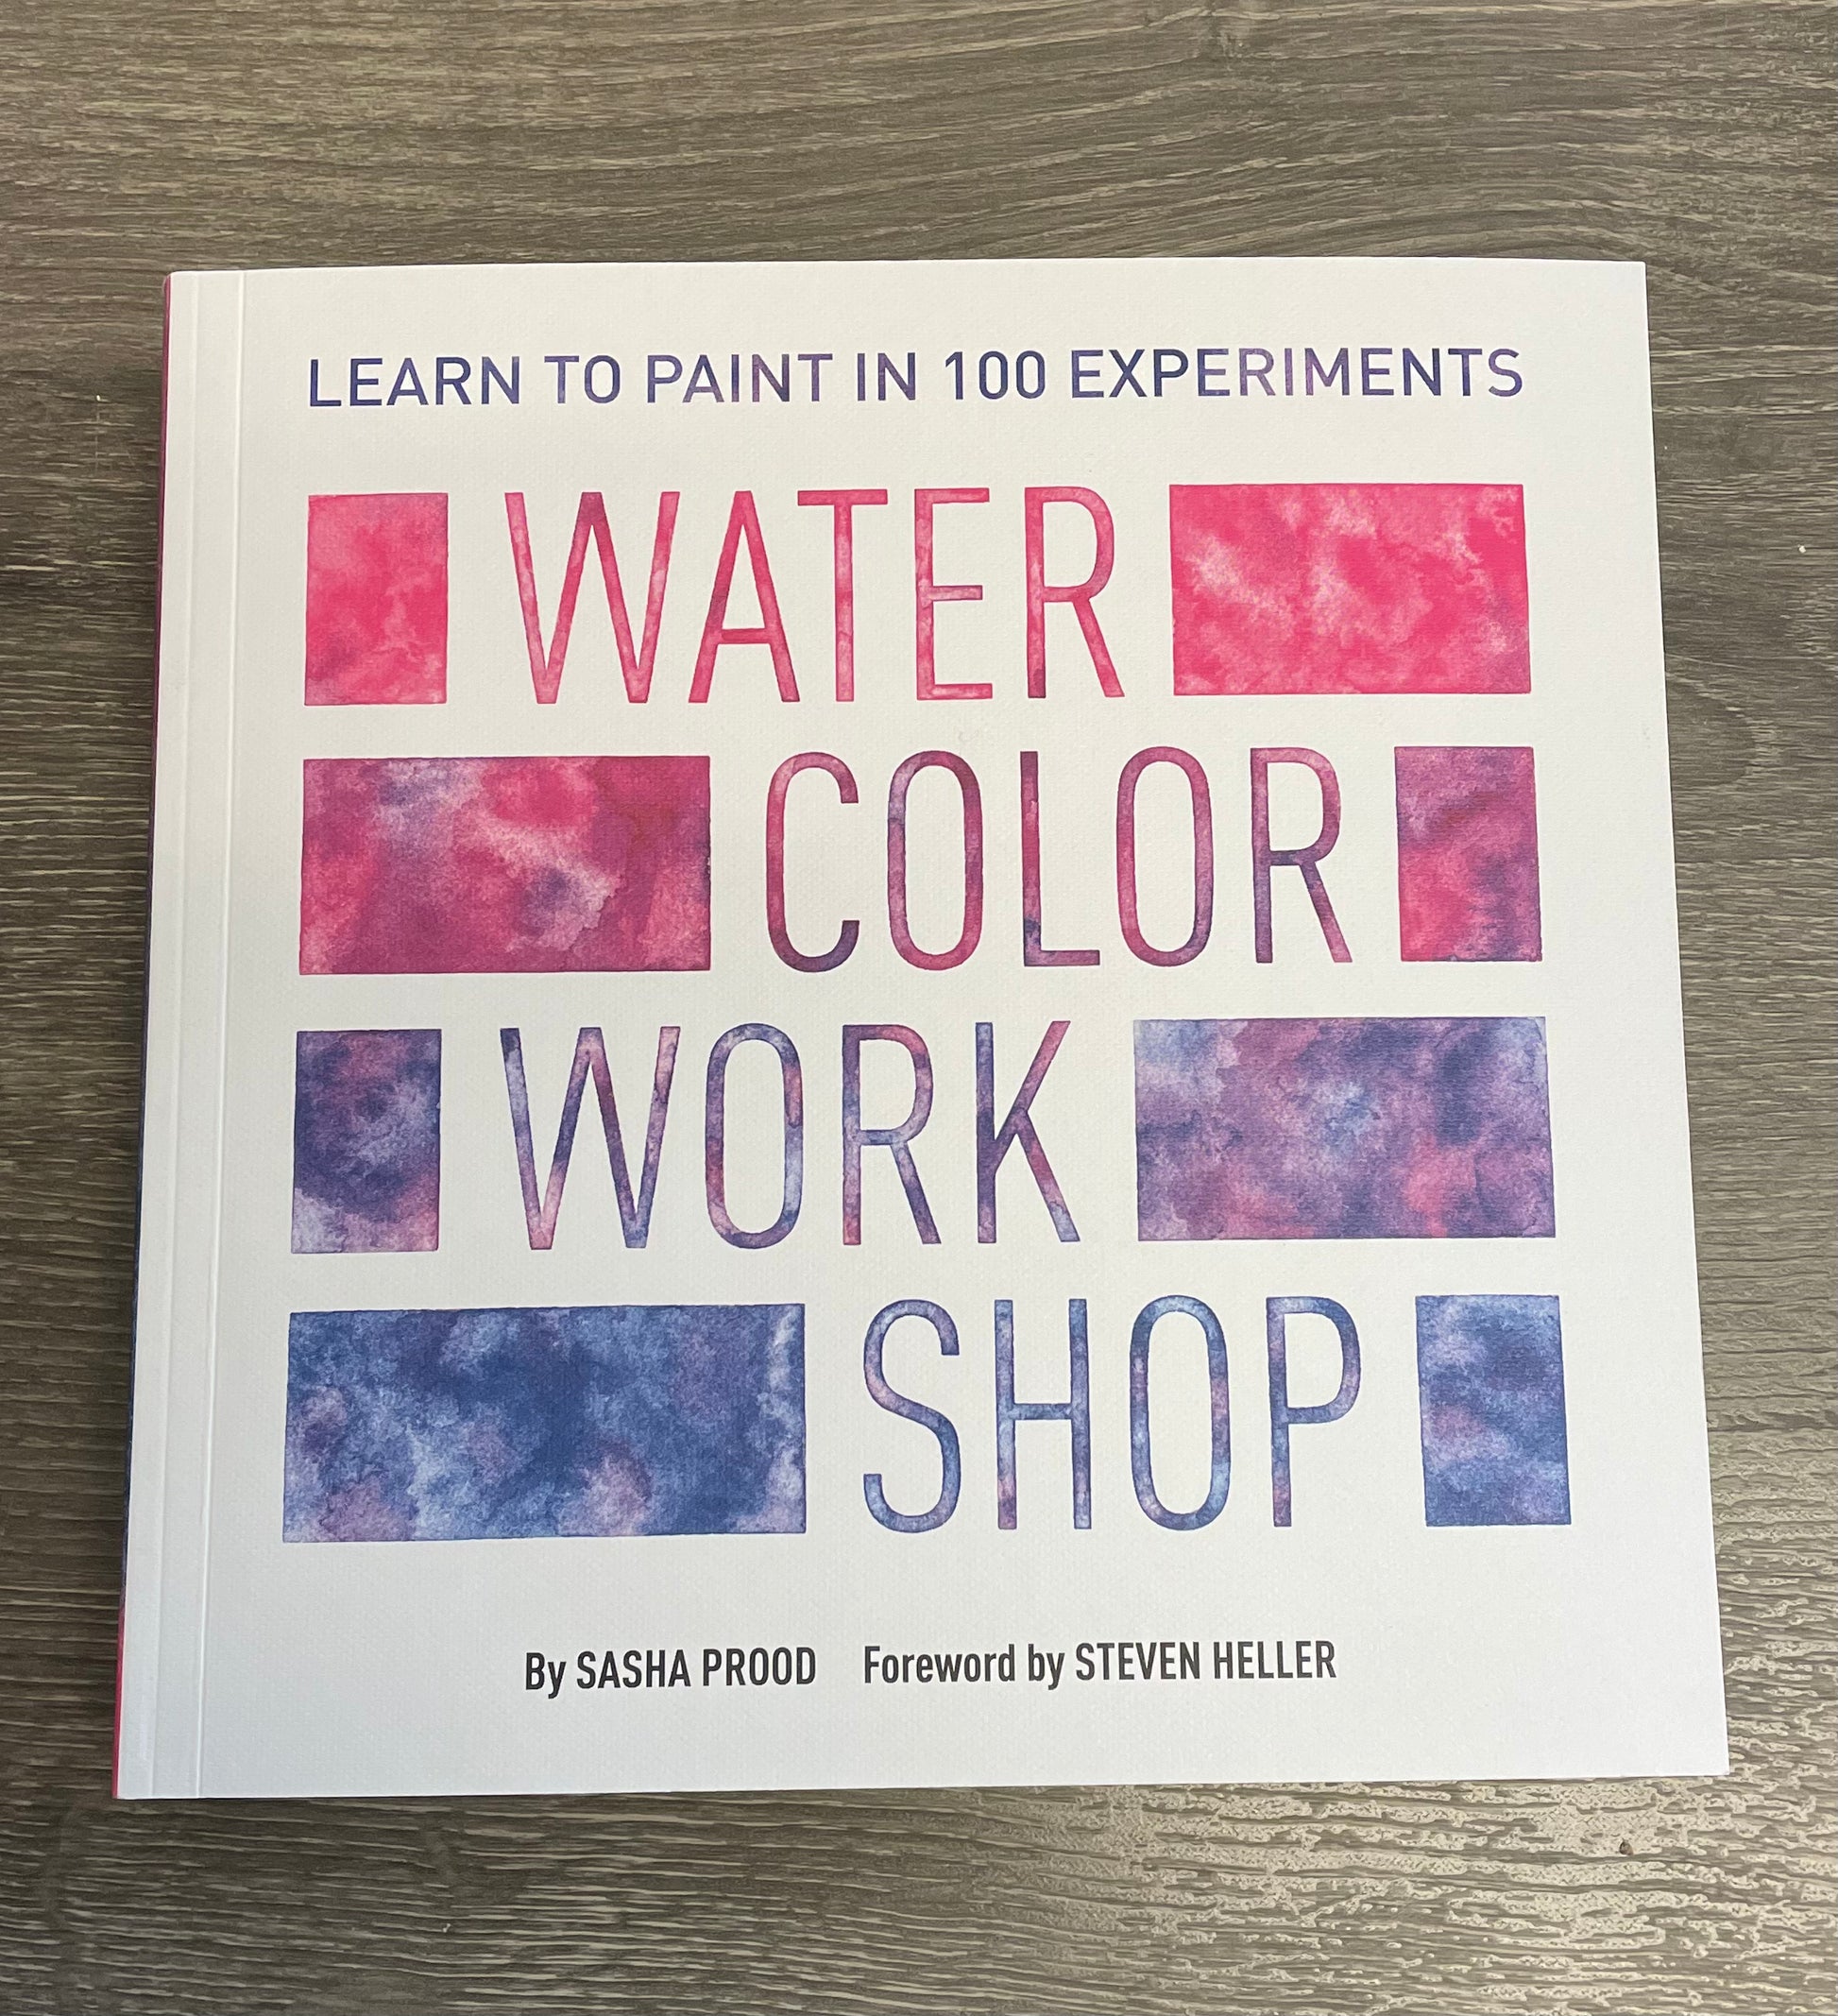 Modern Watercolor Botanicals: A Creative Workshop in Watercolor, Gouache, & Ink [Book]